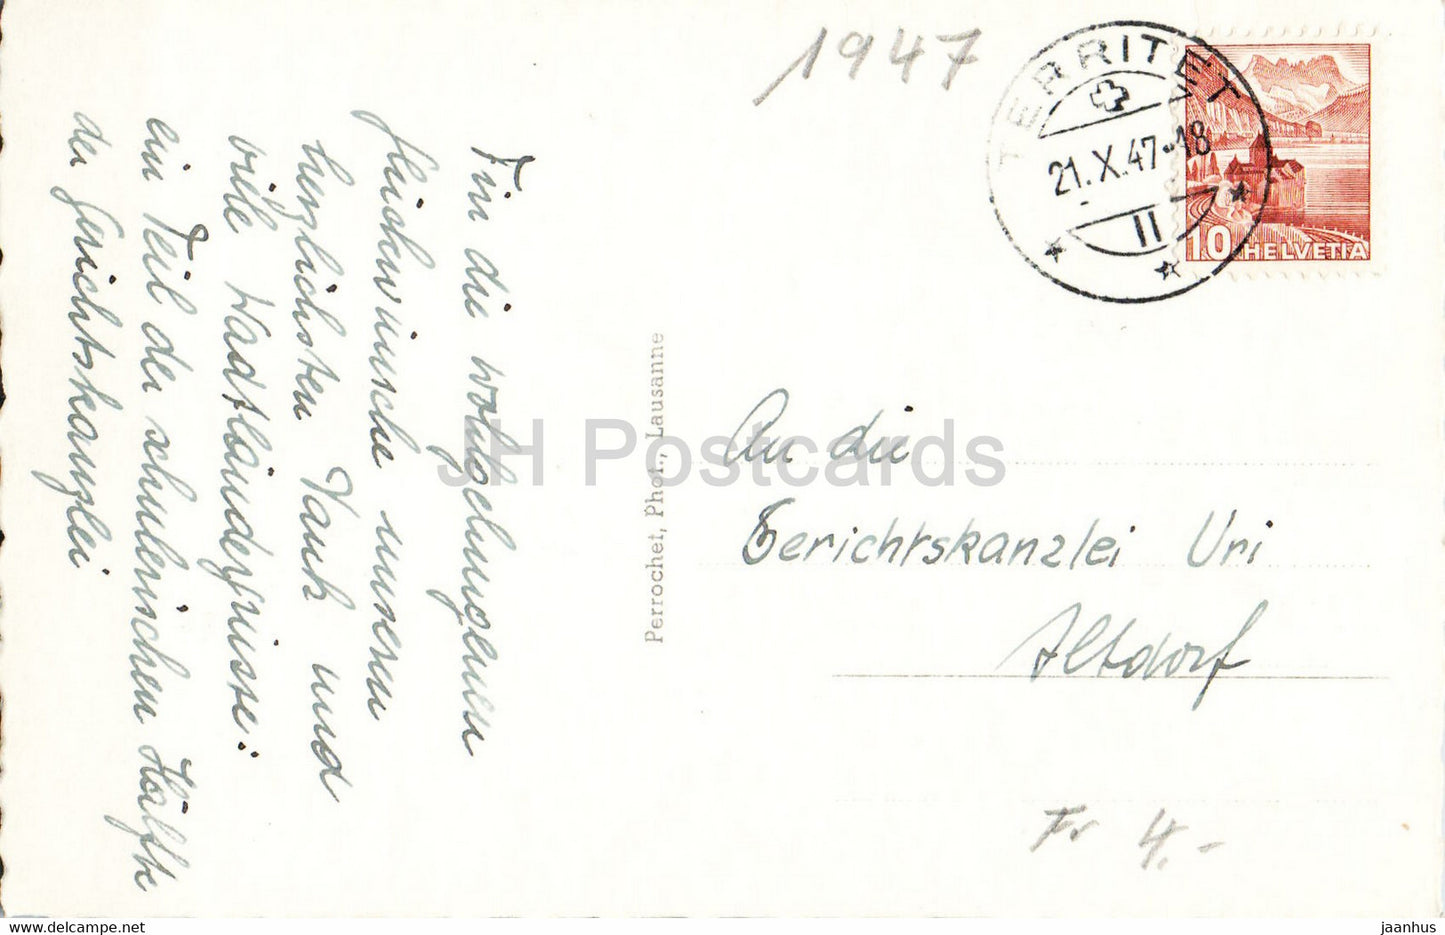 Lausanne - La Cathedrale illuminee - cathedral - 773 - 1947 - old postcard - Switzerland - used